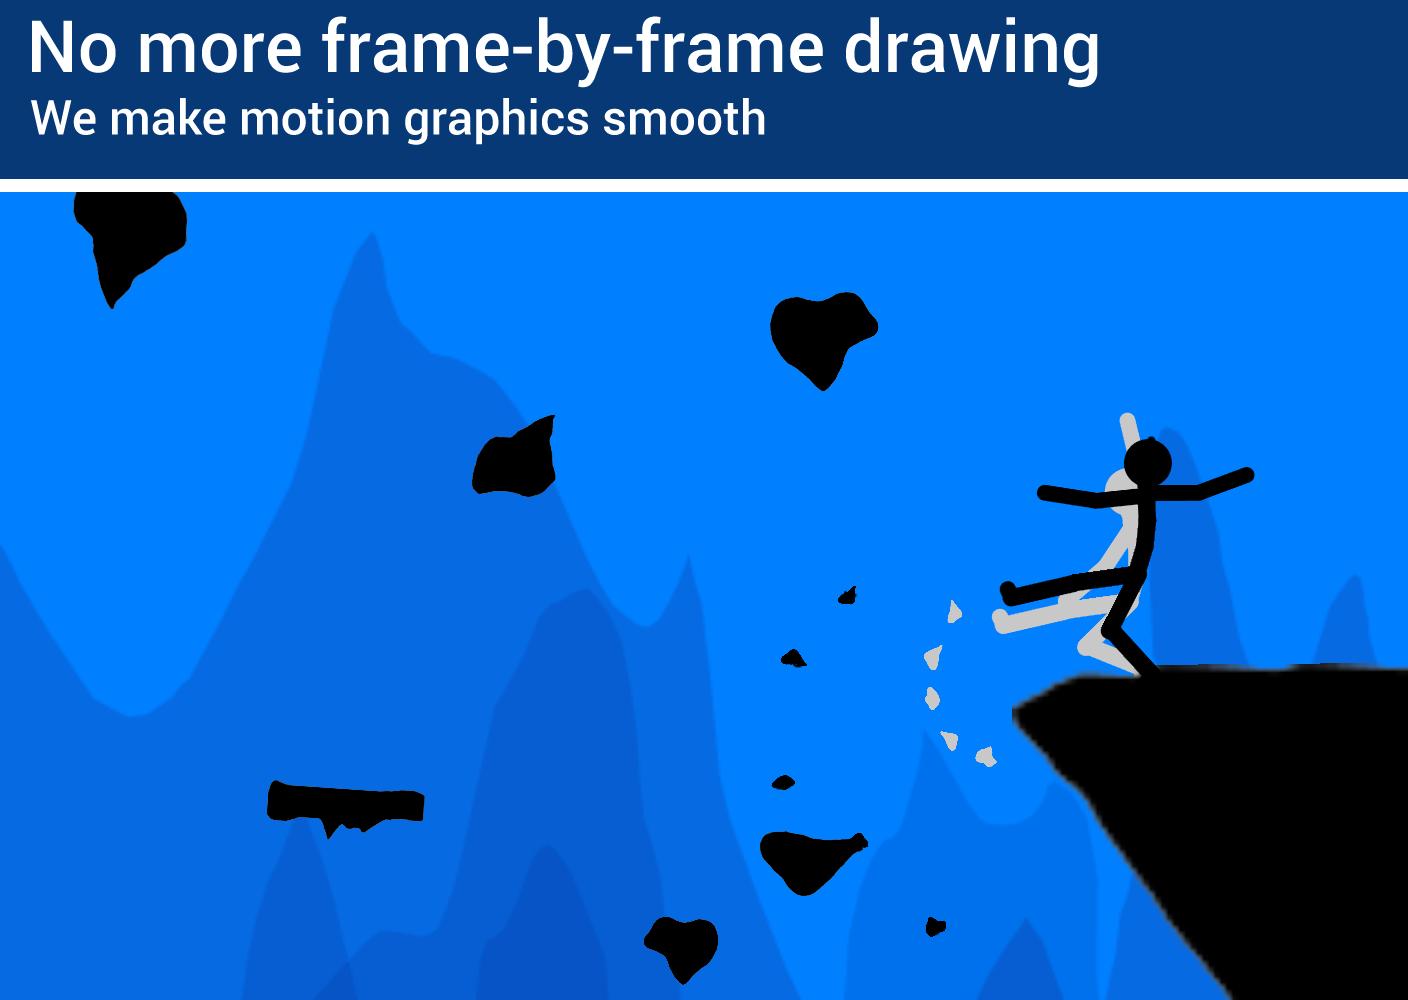 Draw Cartoons 2 PRO for Android - APK Download